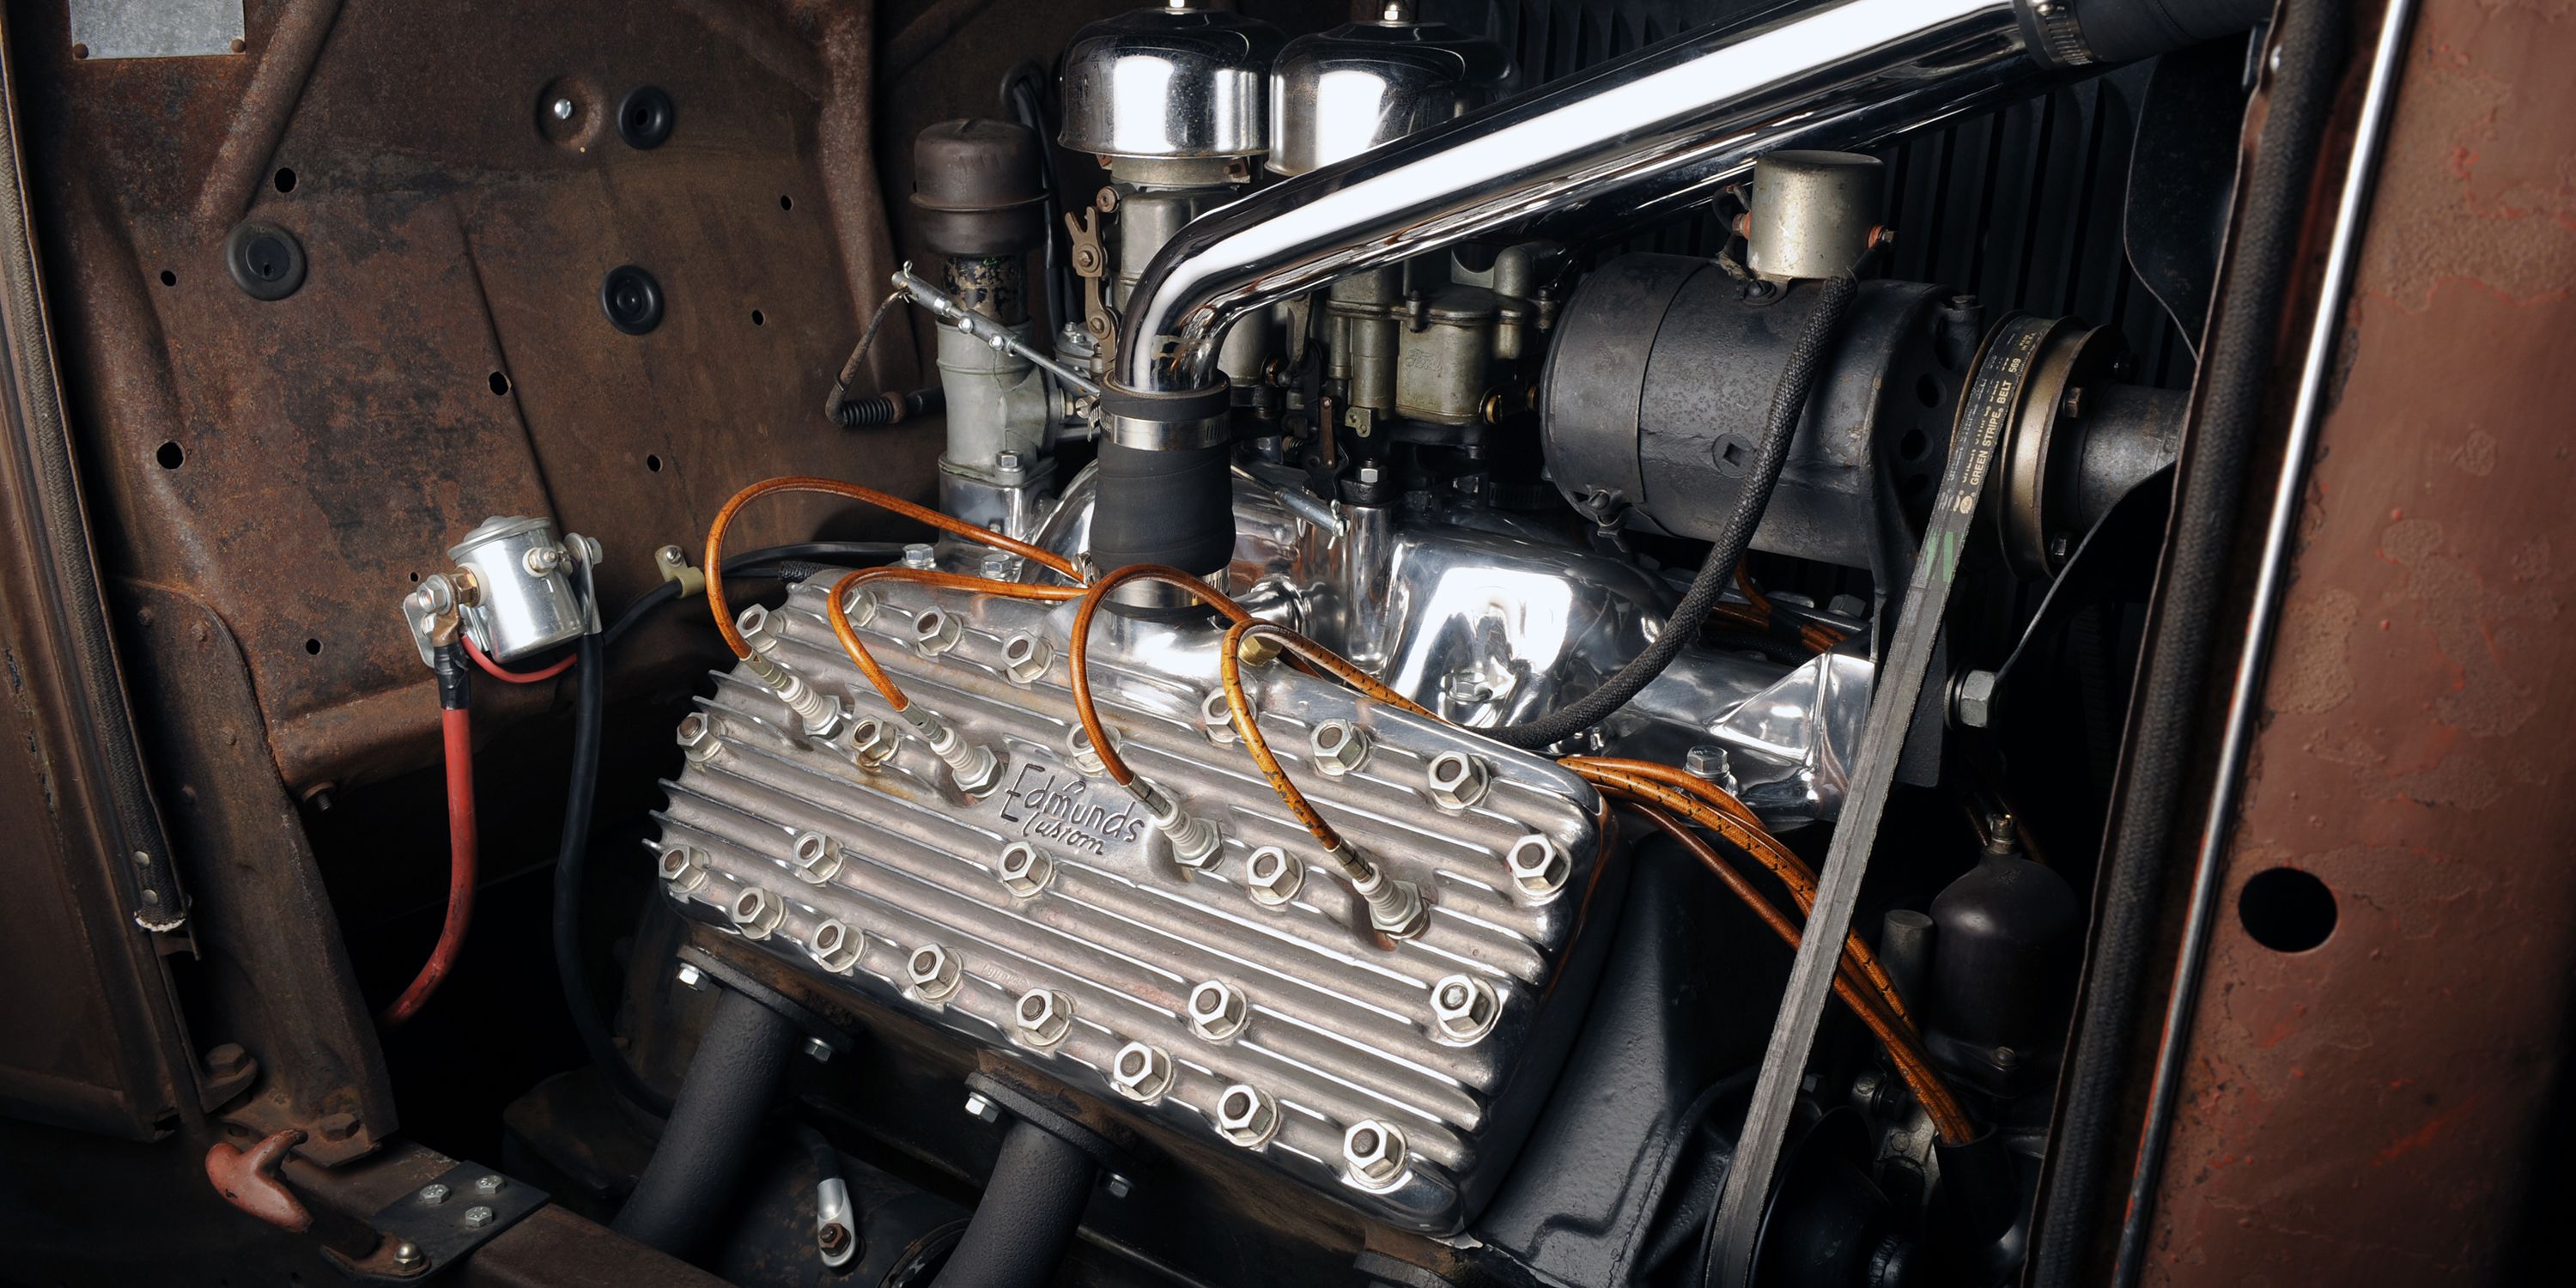 Why The Ford Flathead V8 Succeeded And Why It Had To Die